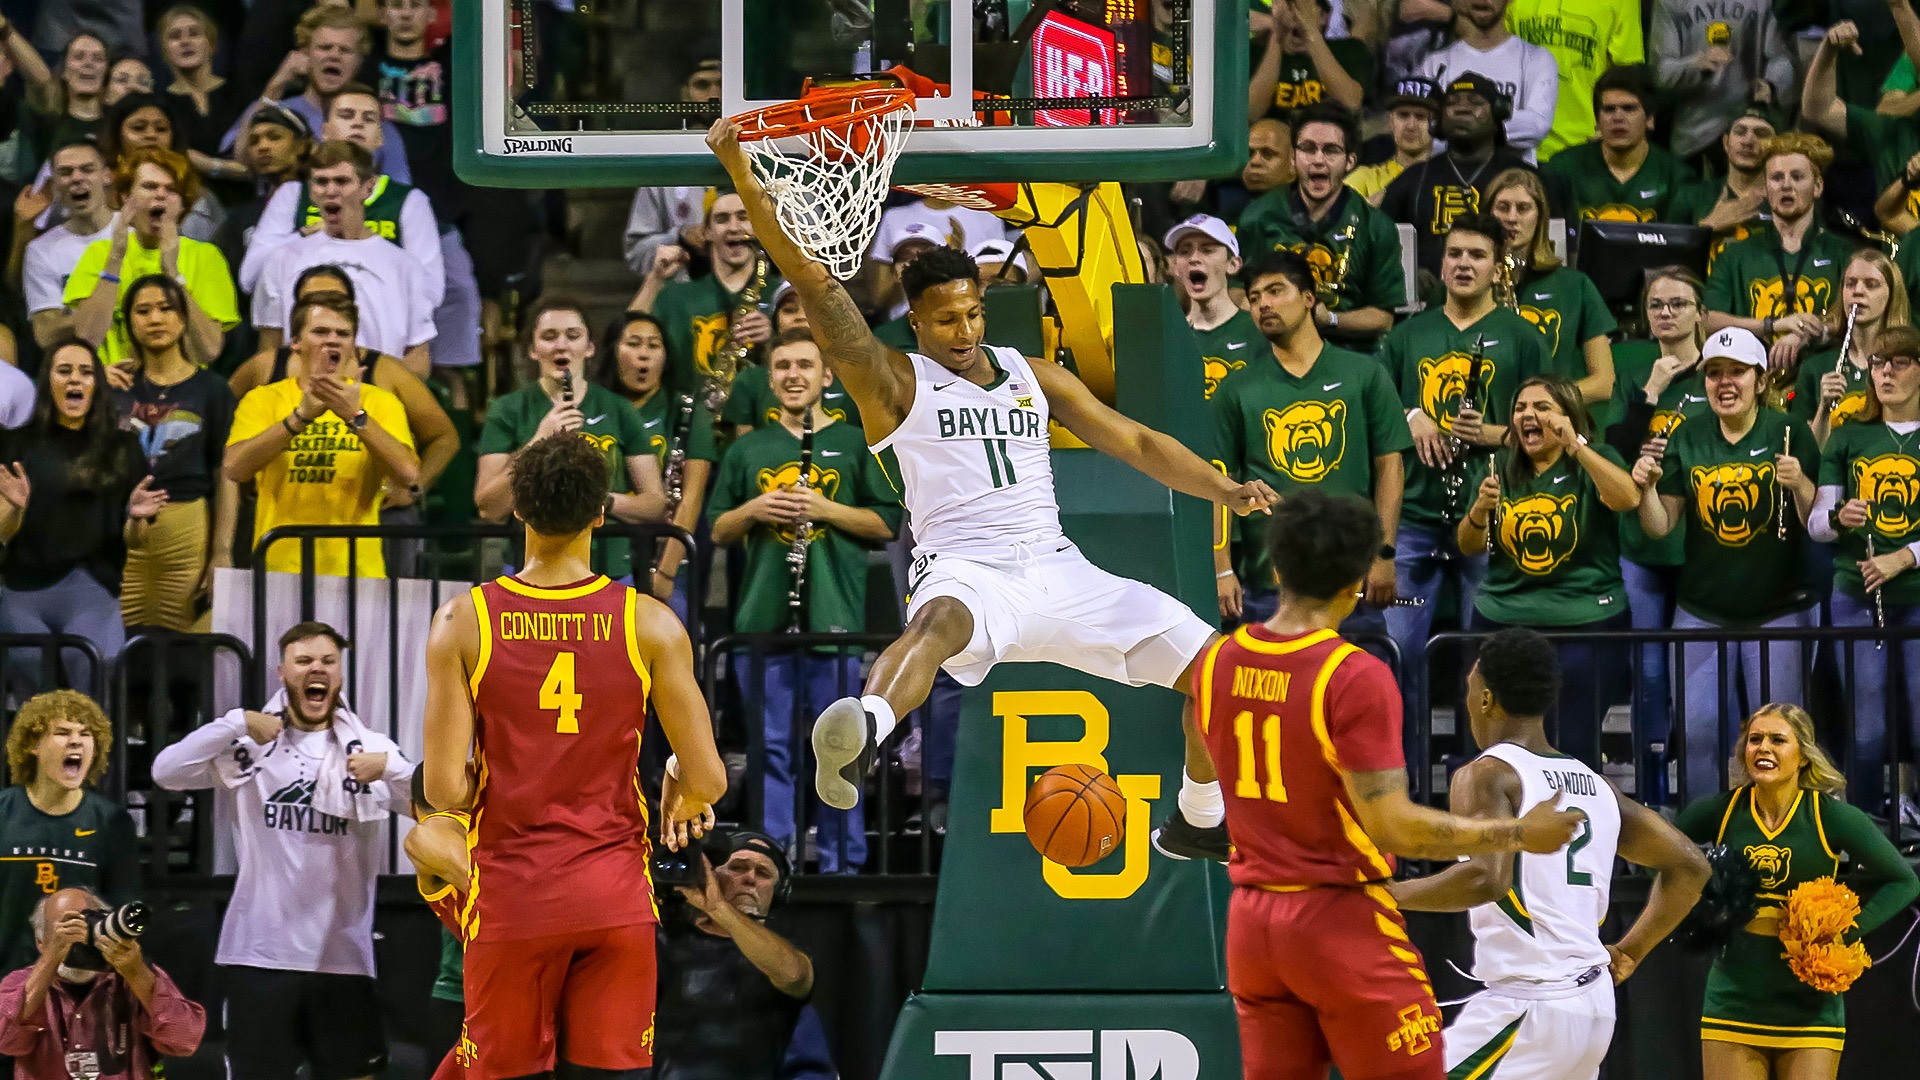 Baylor Basketball On Twitter 2 4 3 On The Court This Year Even More Excited For 2021 Sicem Timeisnow